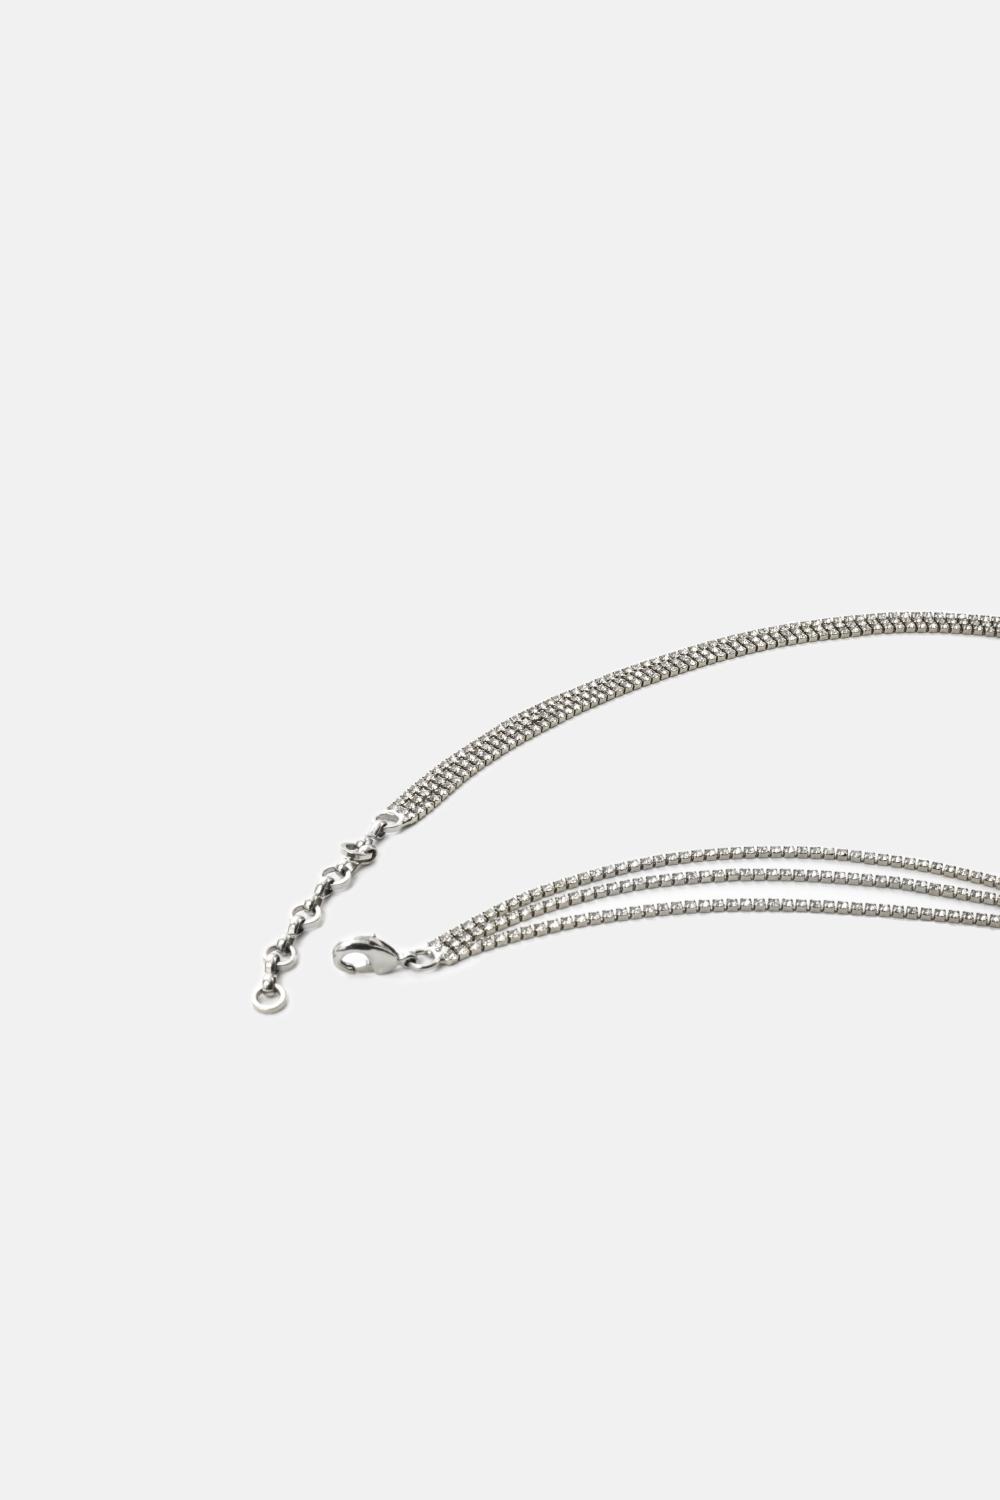 Carry Necklace, Women, Silver